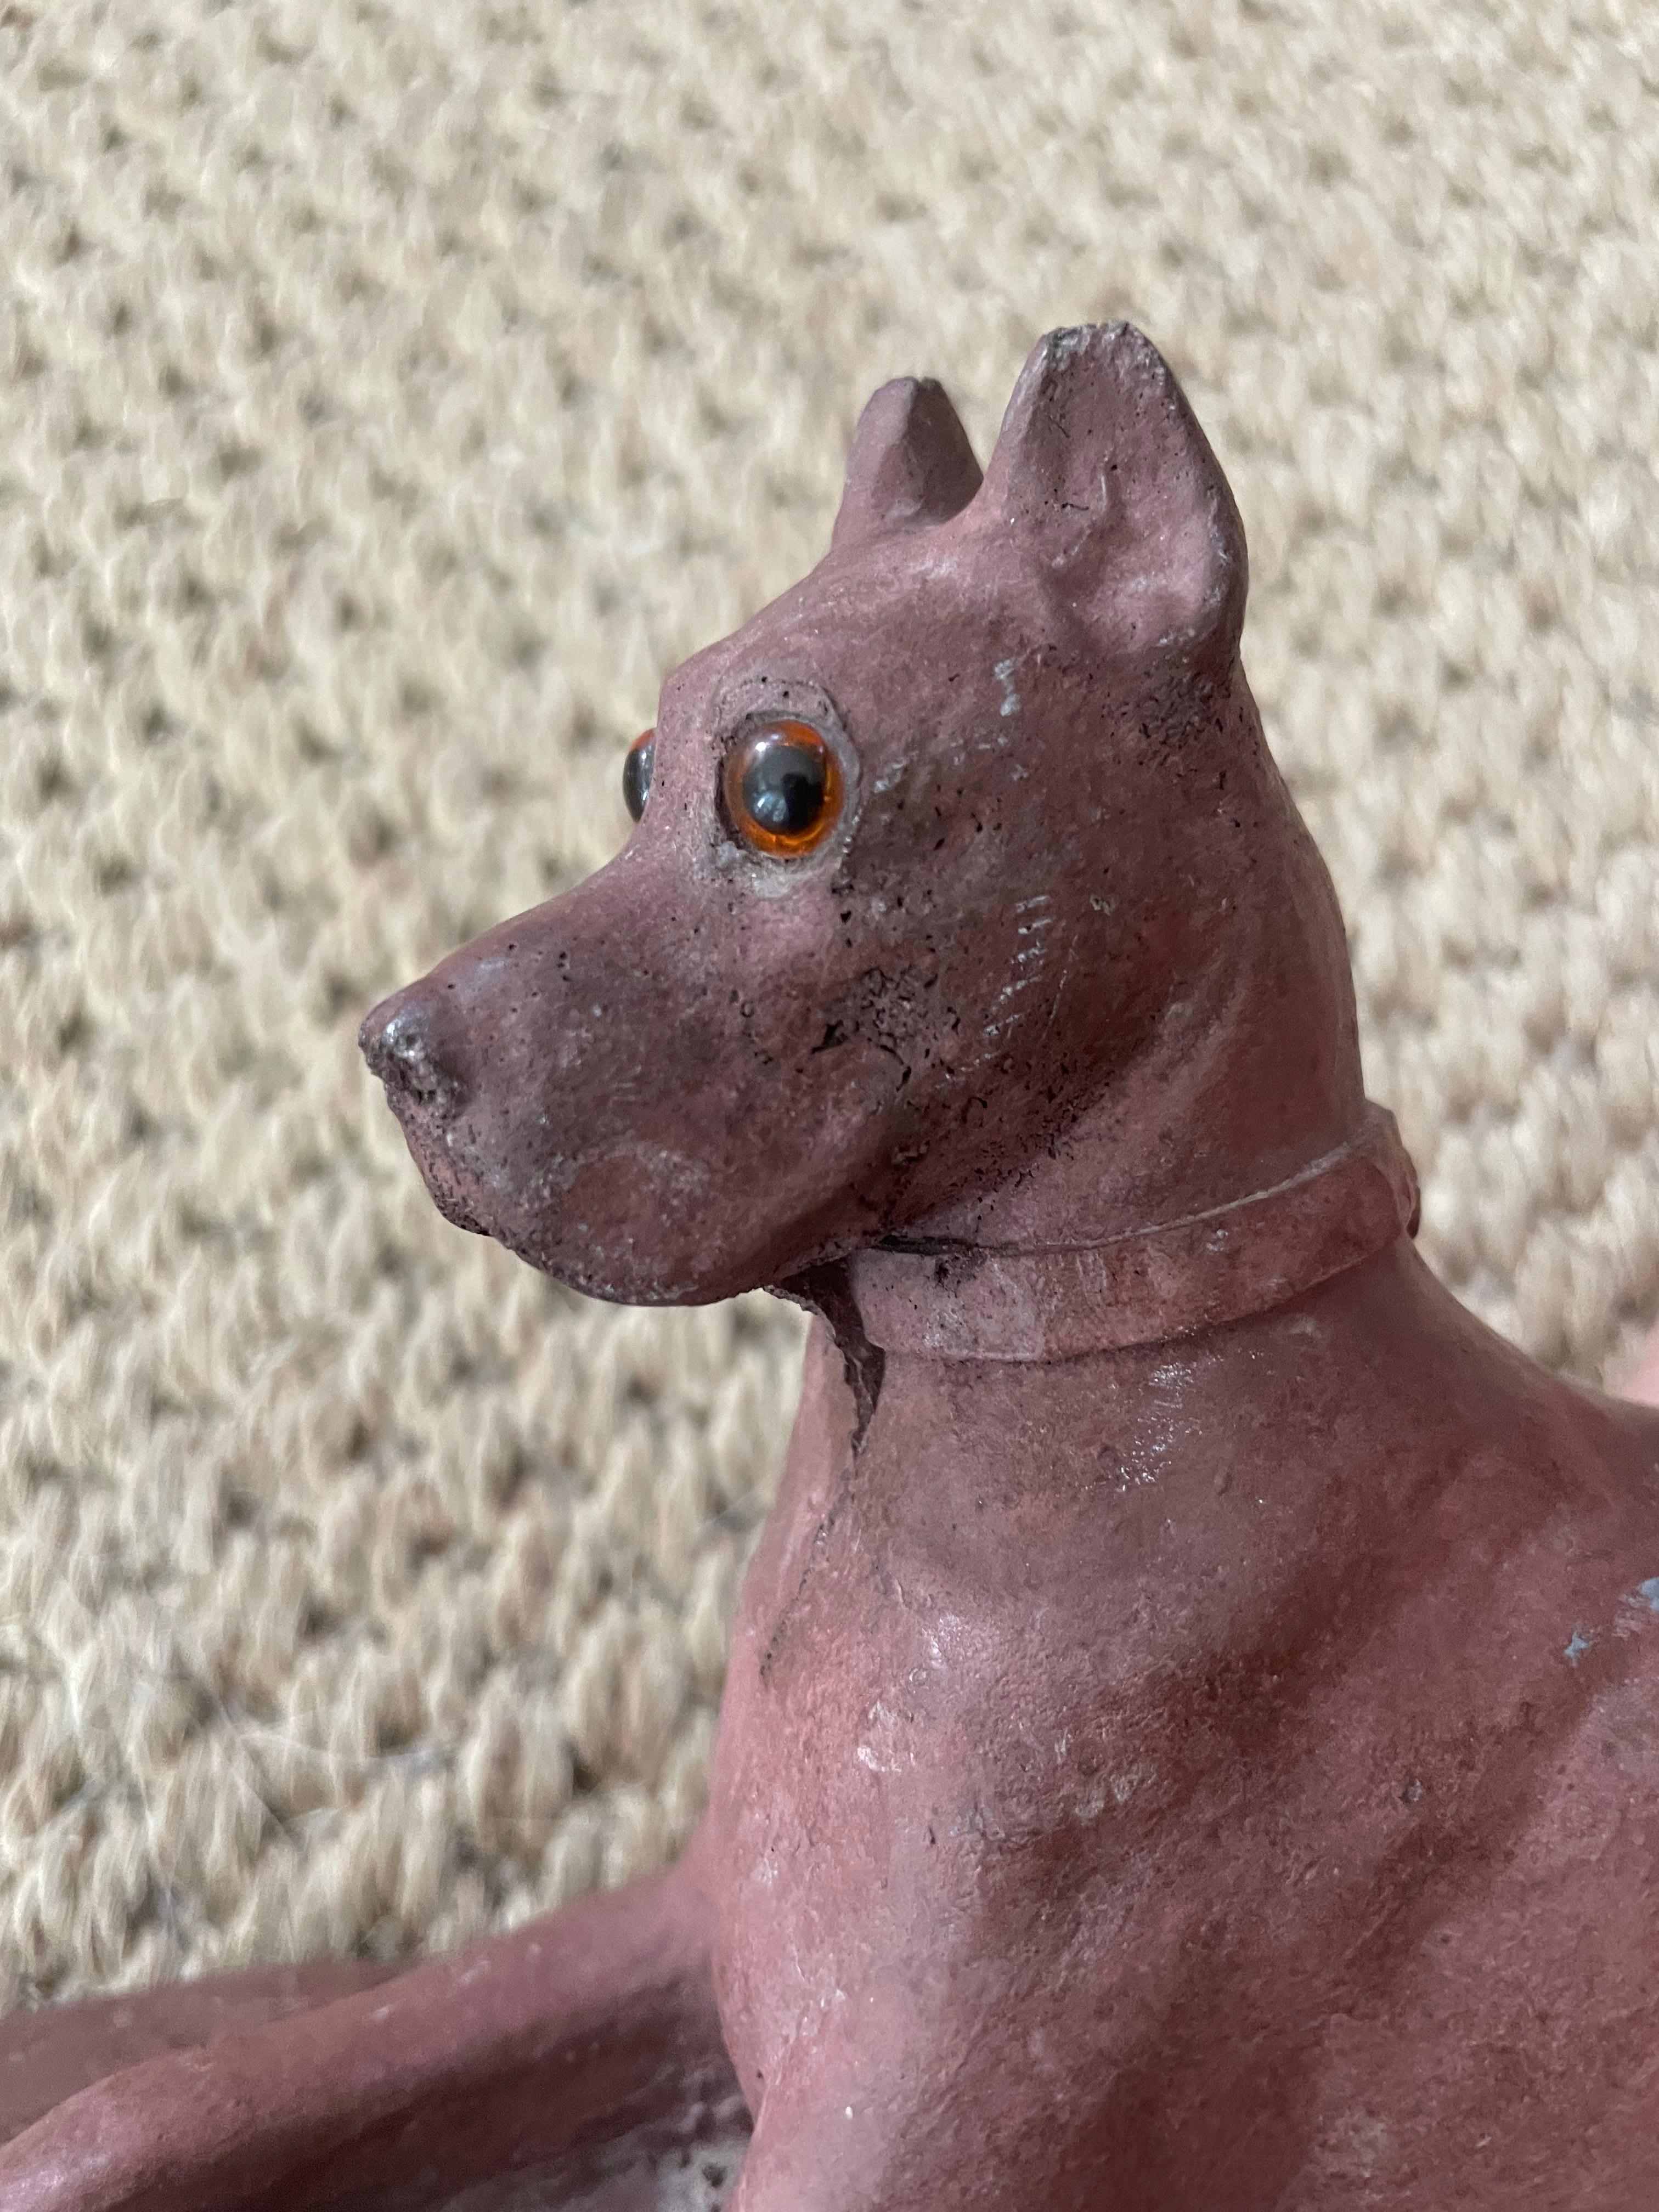 American hound sculpture. Red clay fired recumbent Great Dane with glass eyes. United States, 20th century
Dimensions: 9” W x 3.38” D x 5” H 